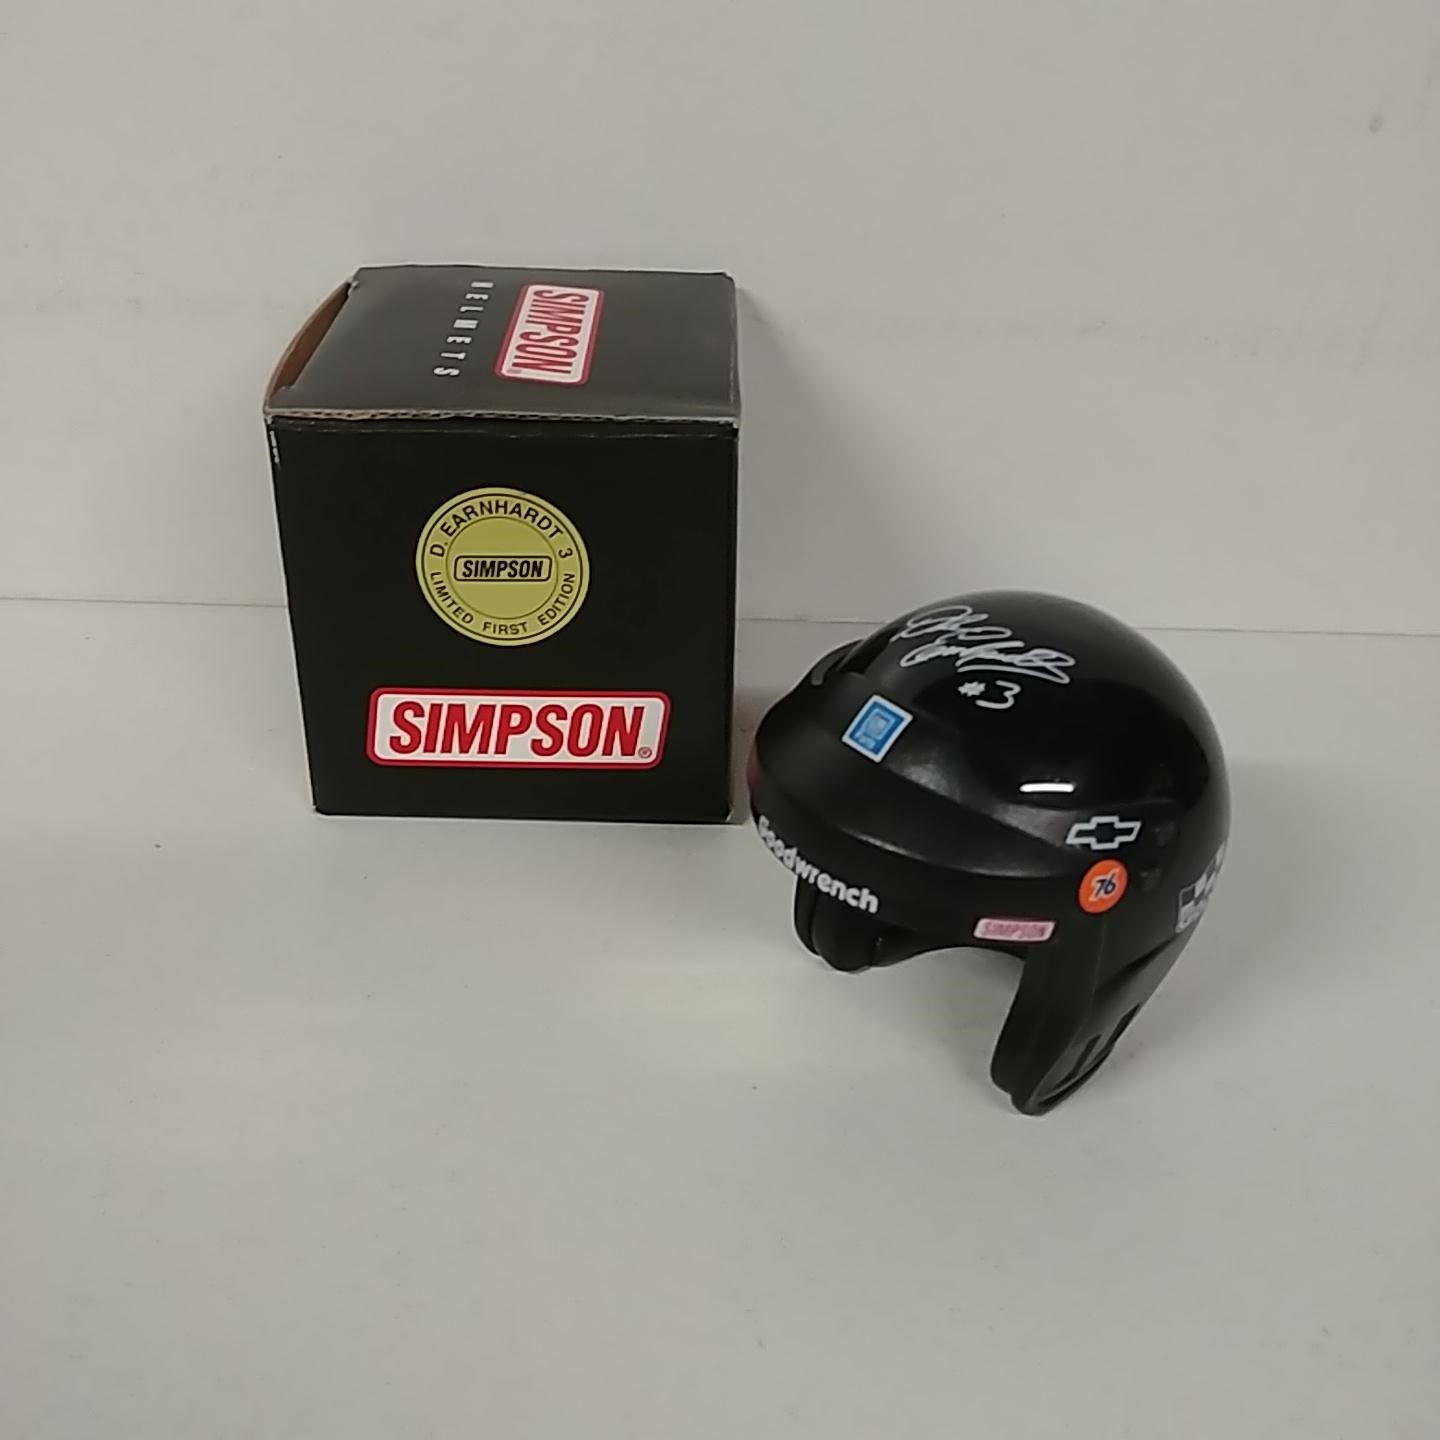 1993 Dale Earnhardt 1/4th GM Goodwrench Simpson Helmet